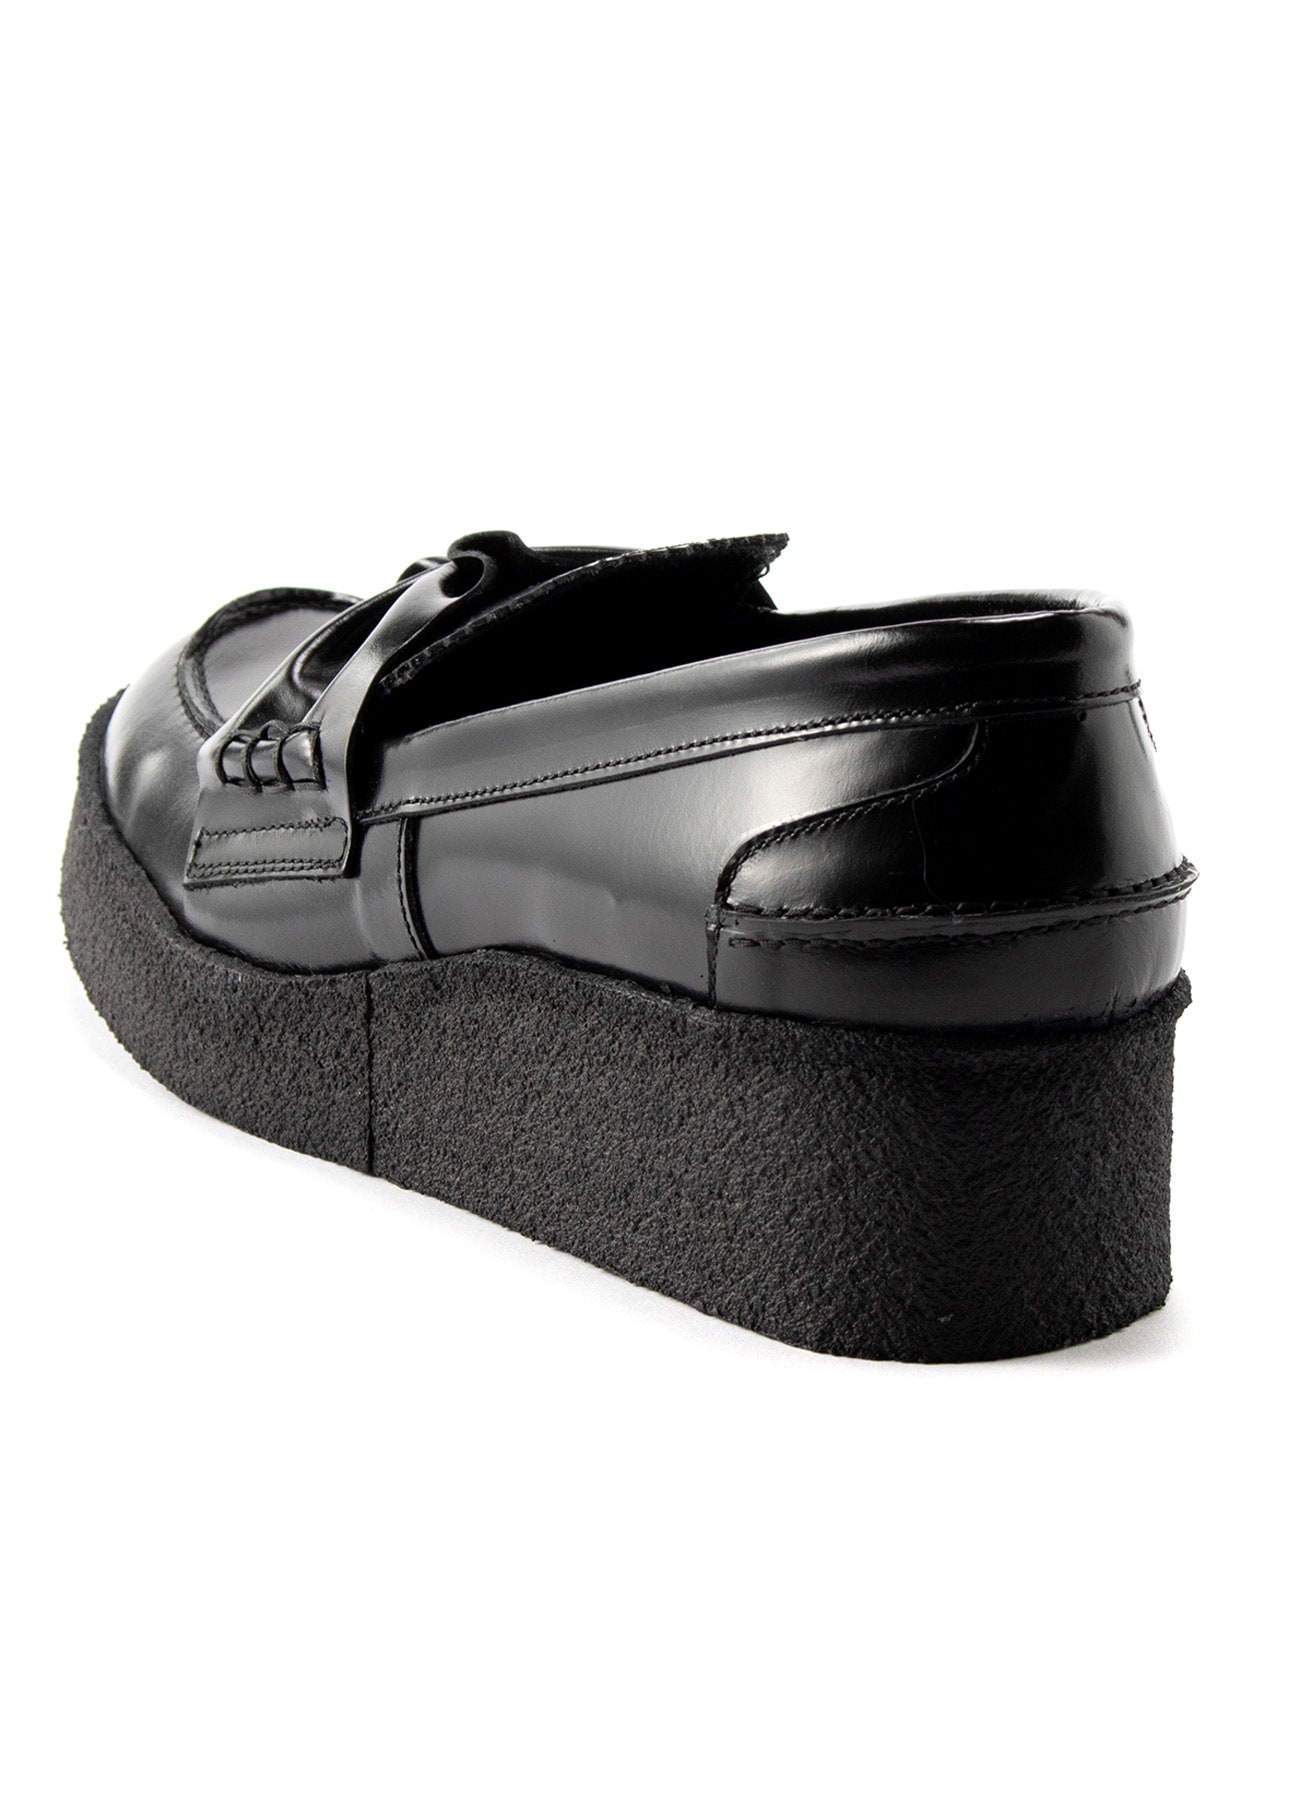 SOFT GLASS THICK SOLE LOAFER